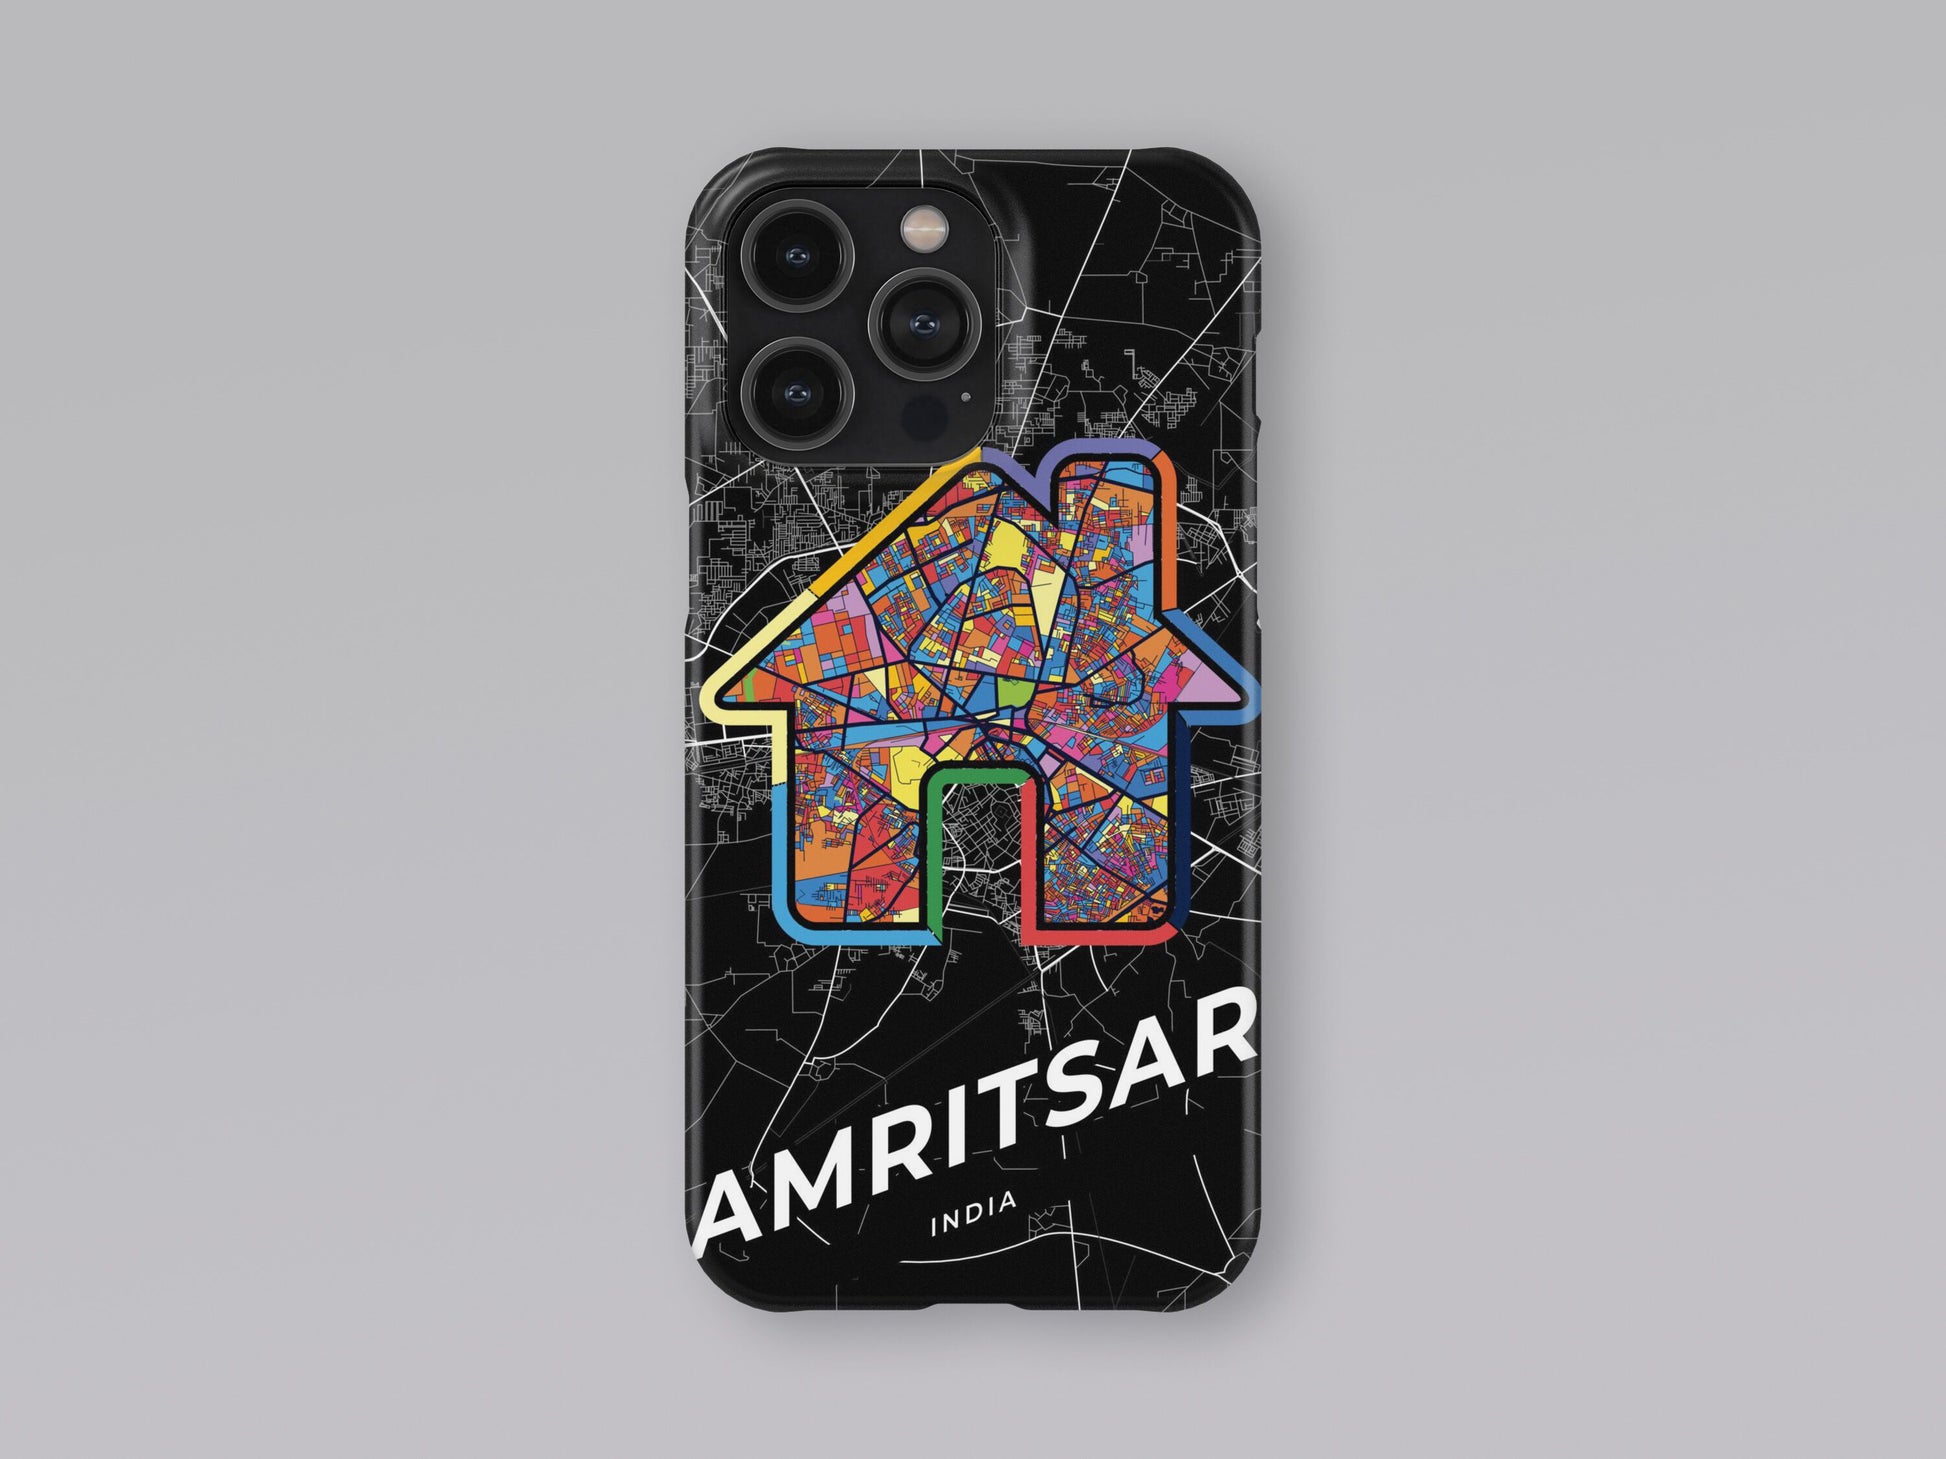 Amritsar India slim phone case with colorful icon. Birthday, wedding or housewarming gift. Couple match cases. 3